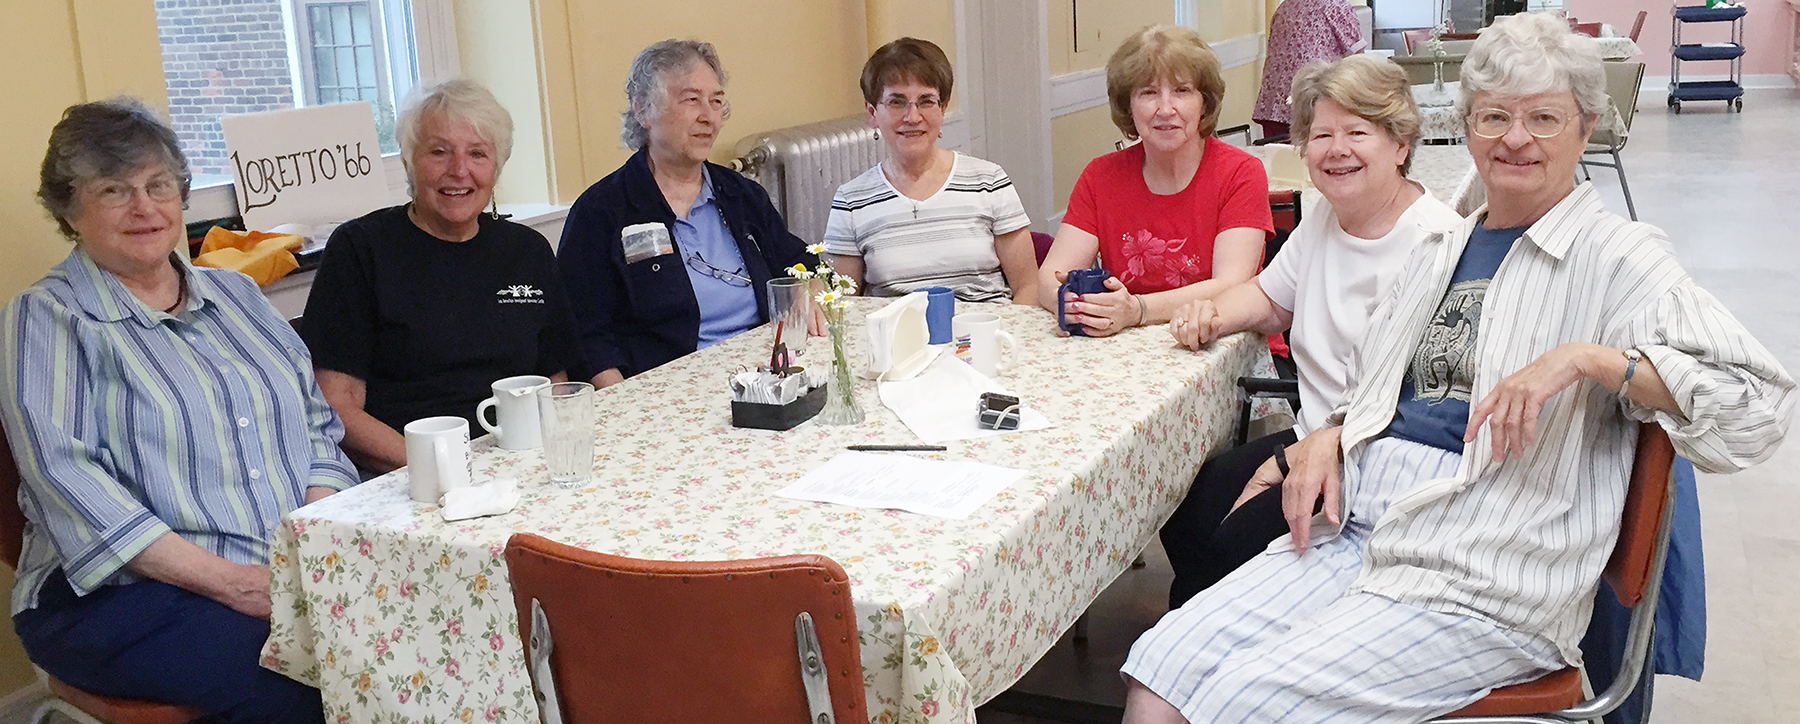 Loretto Class of ‘66 recently celebrated their 50th anniversary at the Loretto Motherhouse. From left are Sandy Tokarski, Mary Helen Sandoval, Marie Ego, Linda Spollen, Diane Elstein, Mary Beth Reese and Sue Charmley. (Photo courtesy of Sue Charmley)